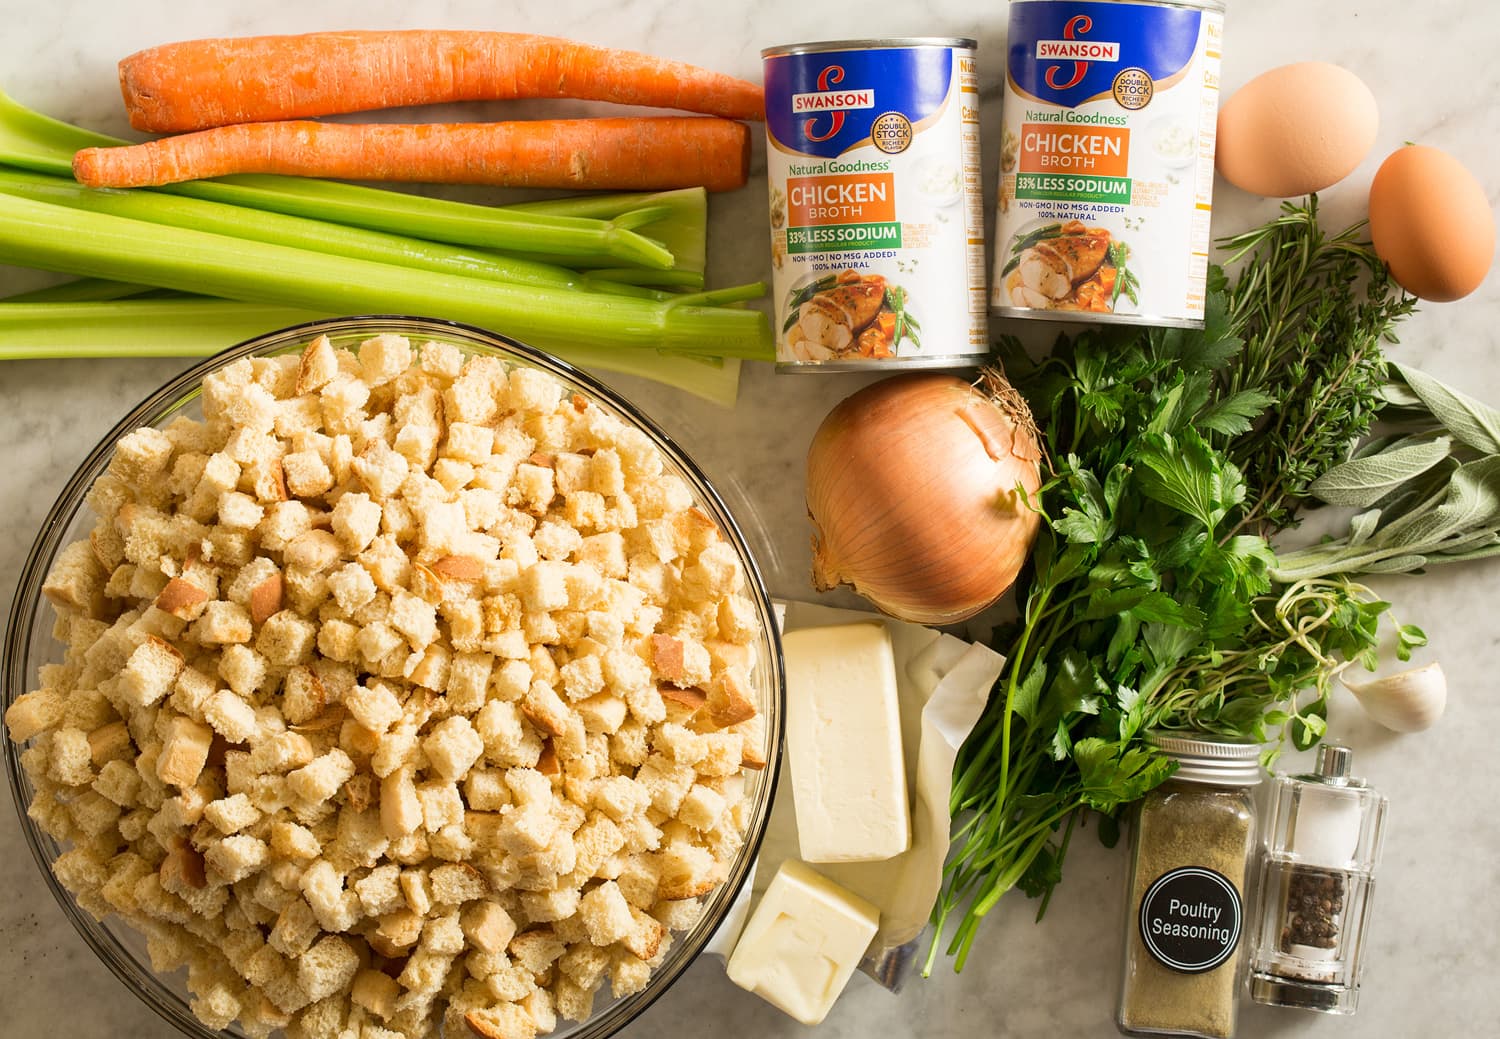 Ingredients for crockpot stuffing.